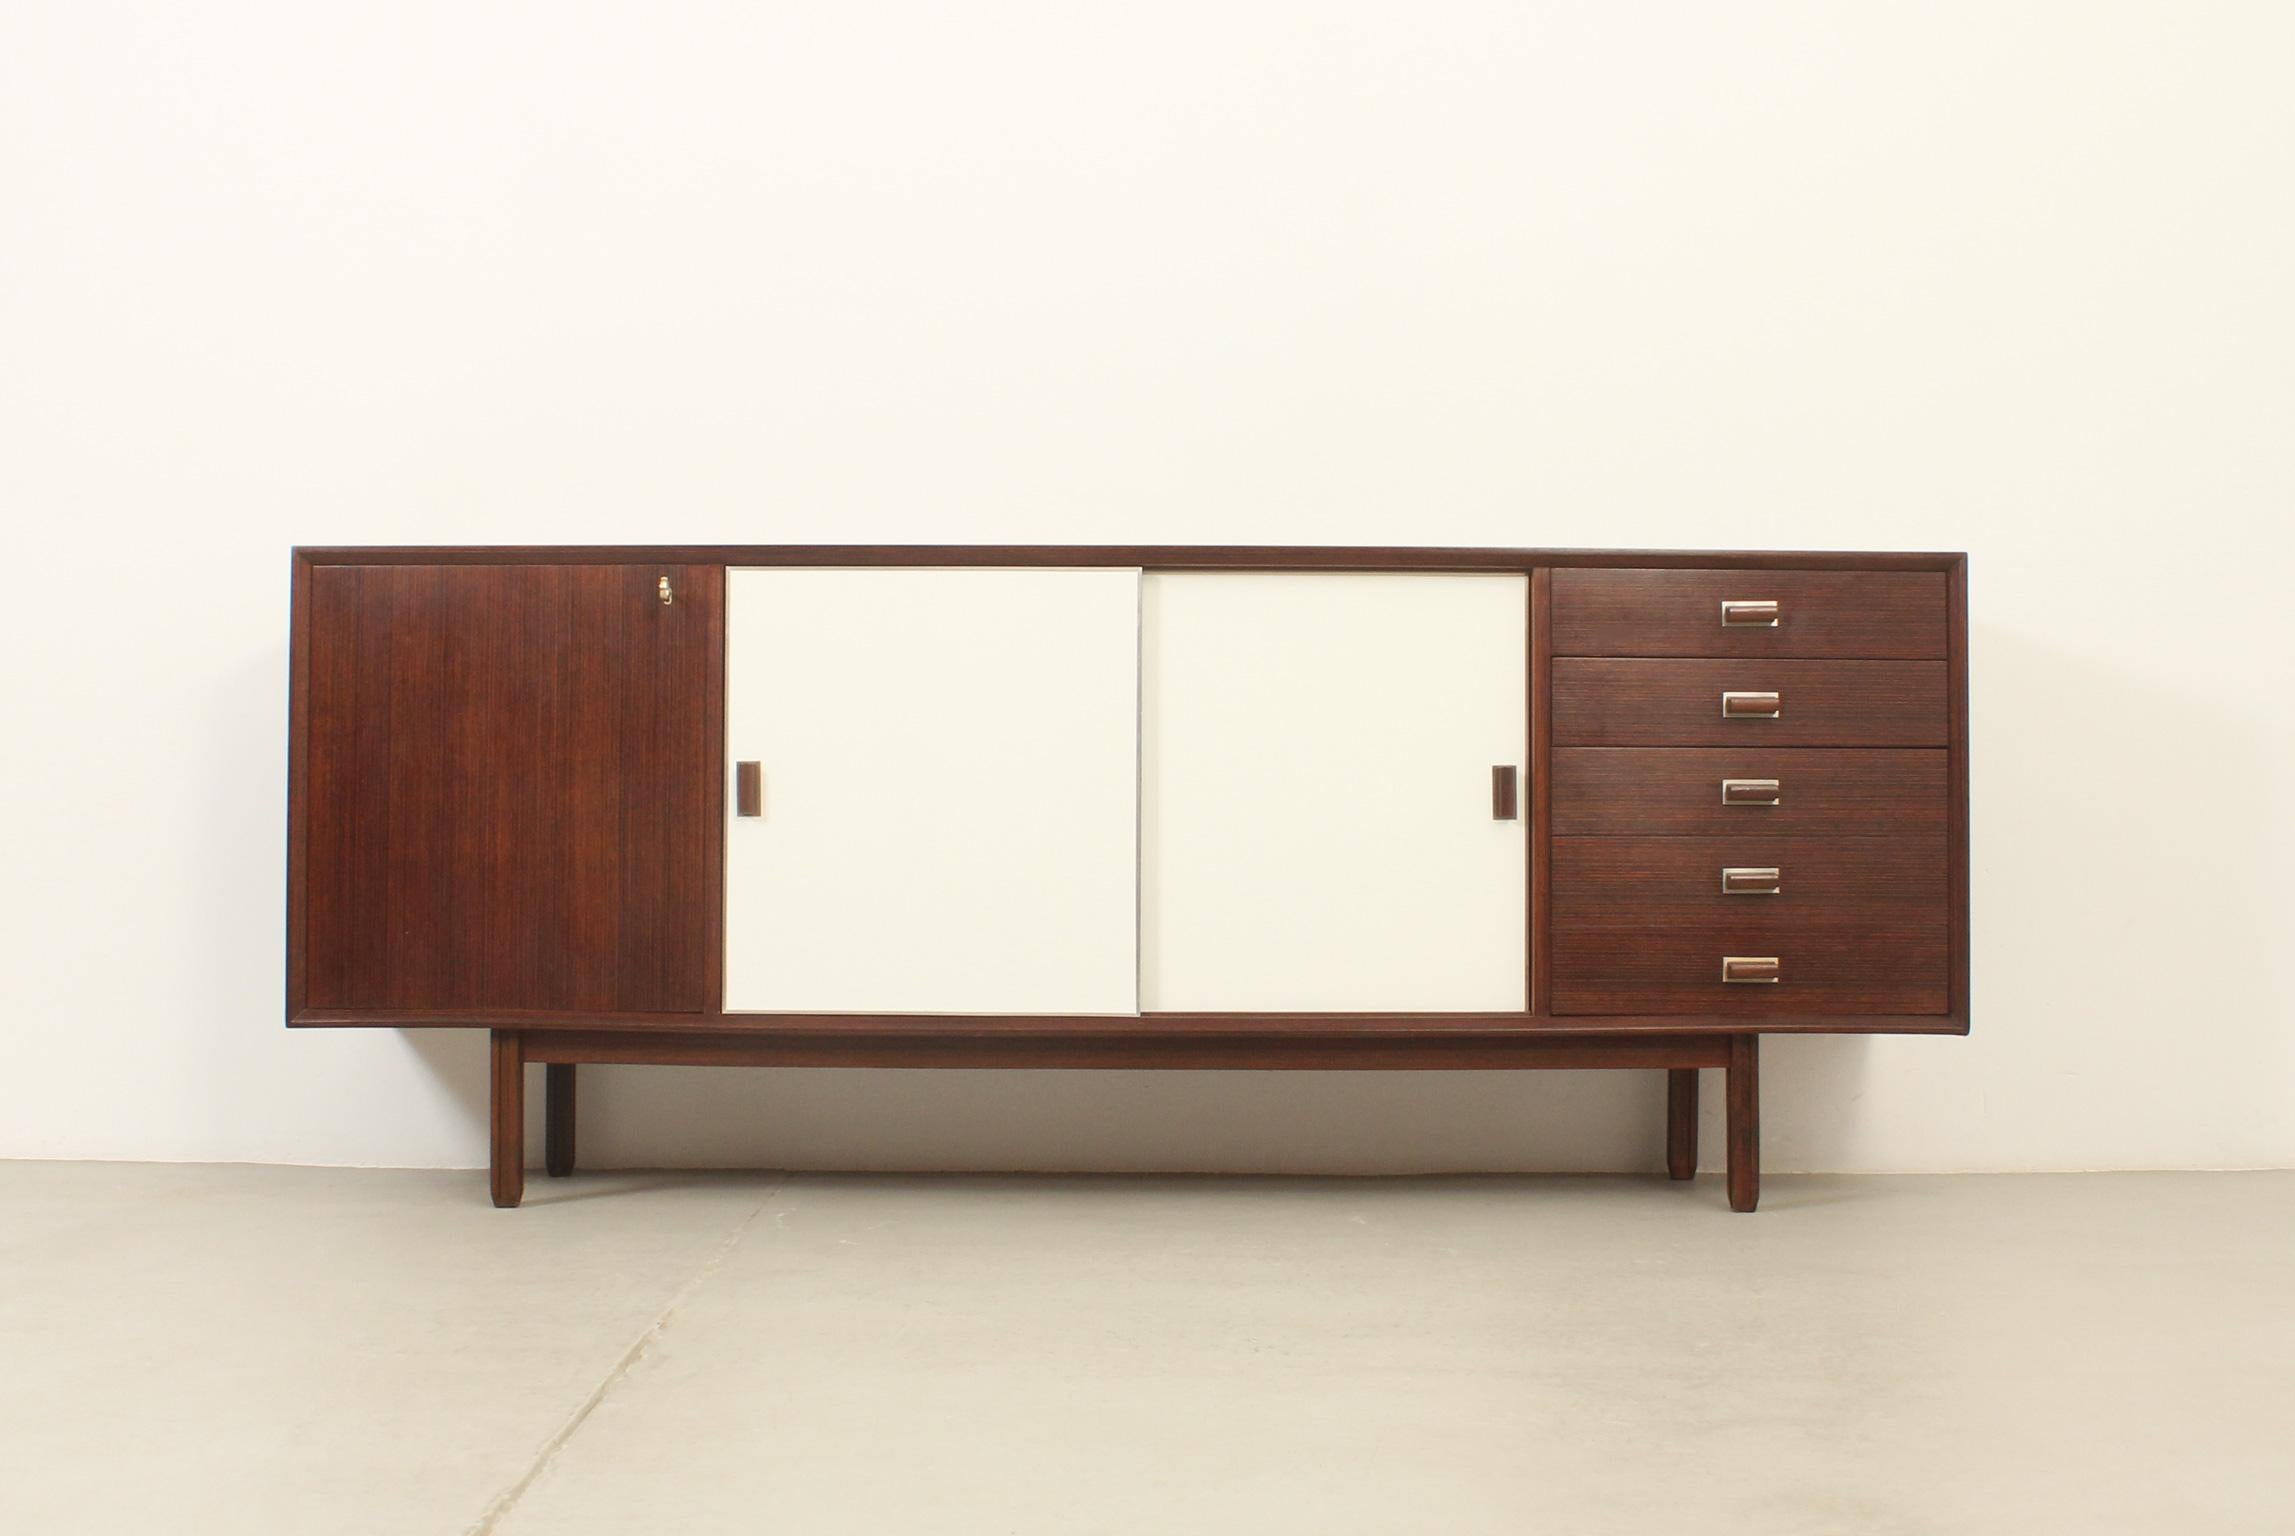 Sideboard model Monika designed in 1960's by George Coslin for Faram, Italy. Wenge and beech wood with laminate sliding doors. Five drawers and three doors with interior shelves. 